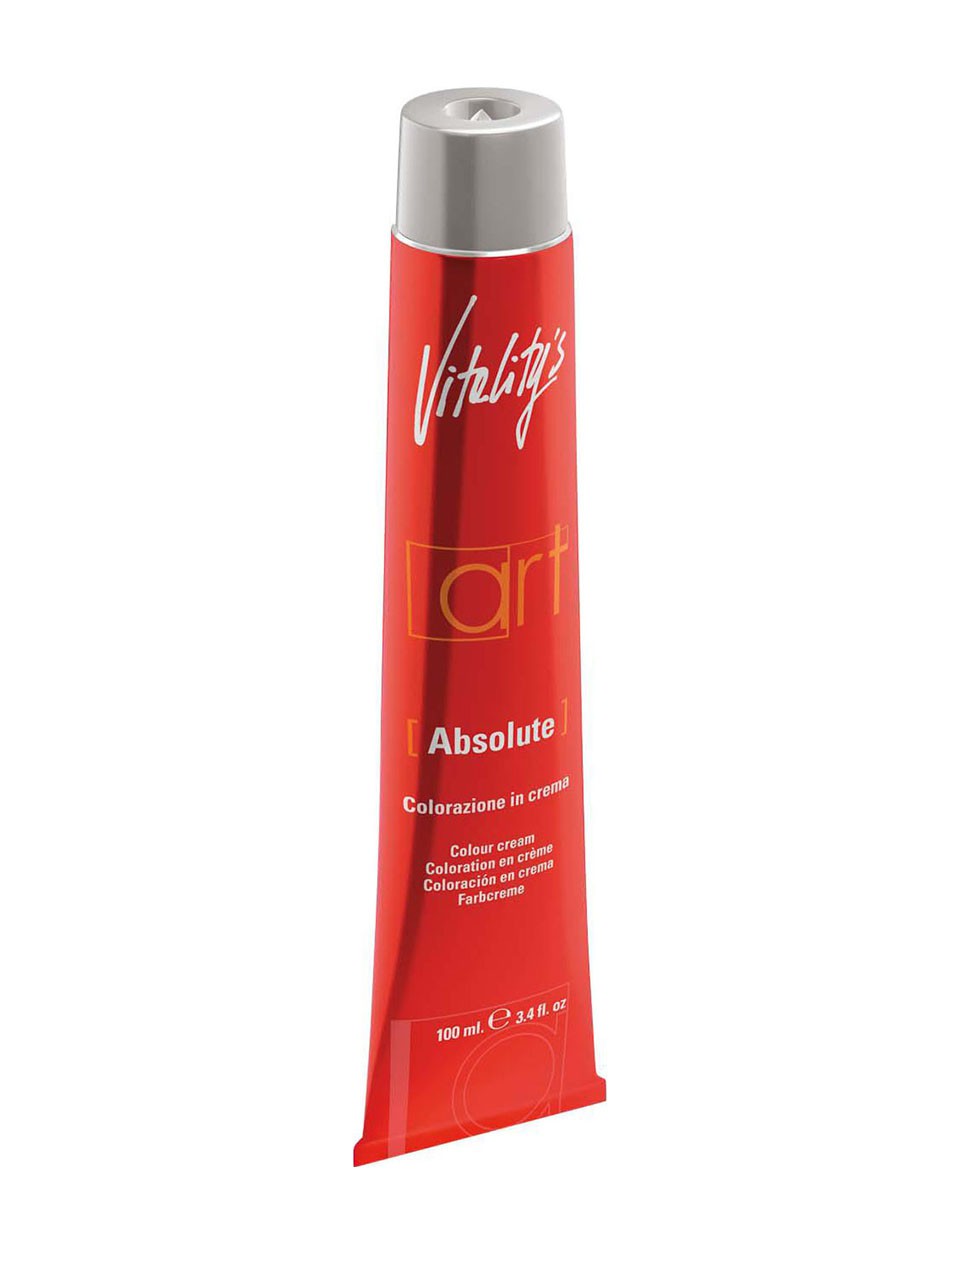 Vitality's Art   8/188 lichtblond intensiv perl-asch Absolute InstaColor